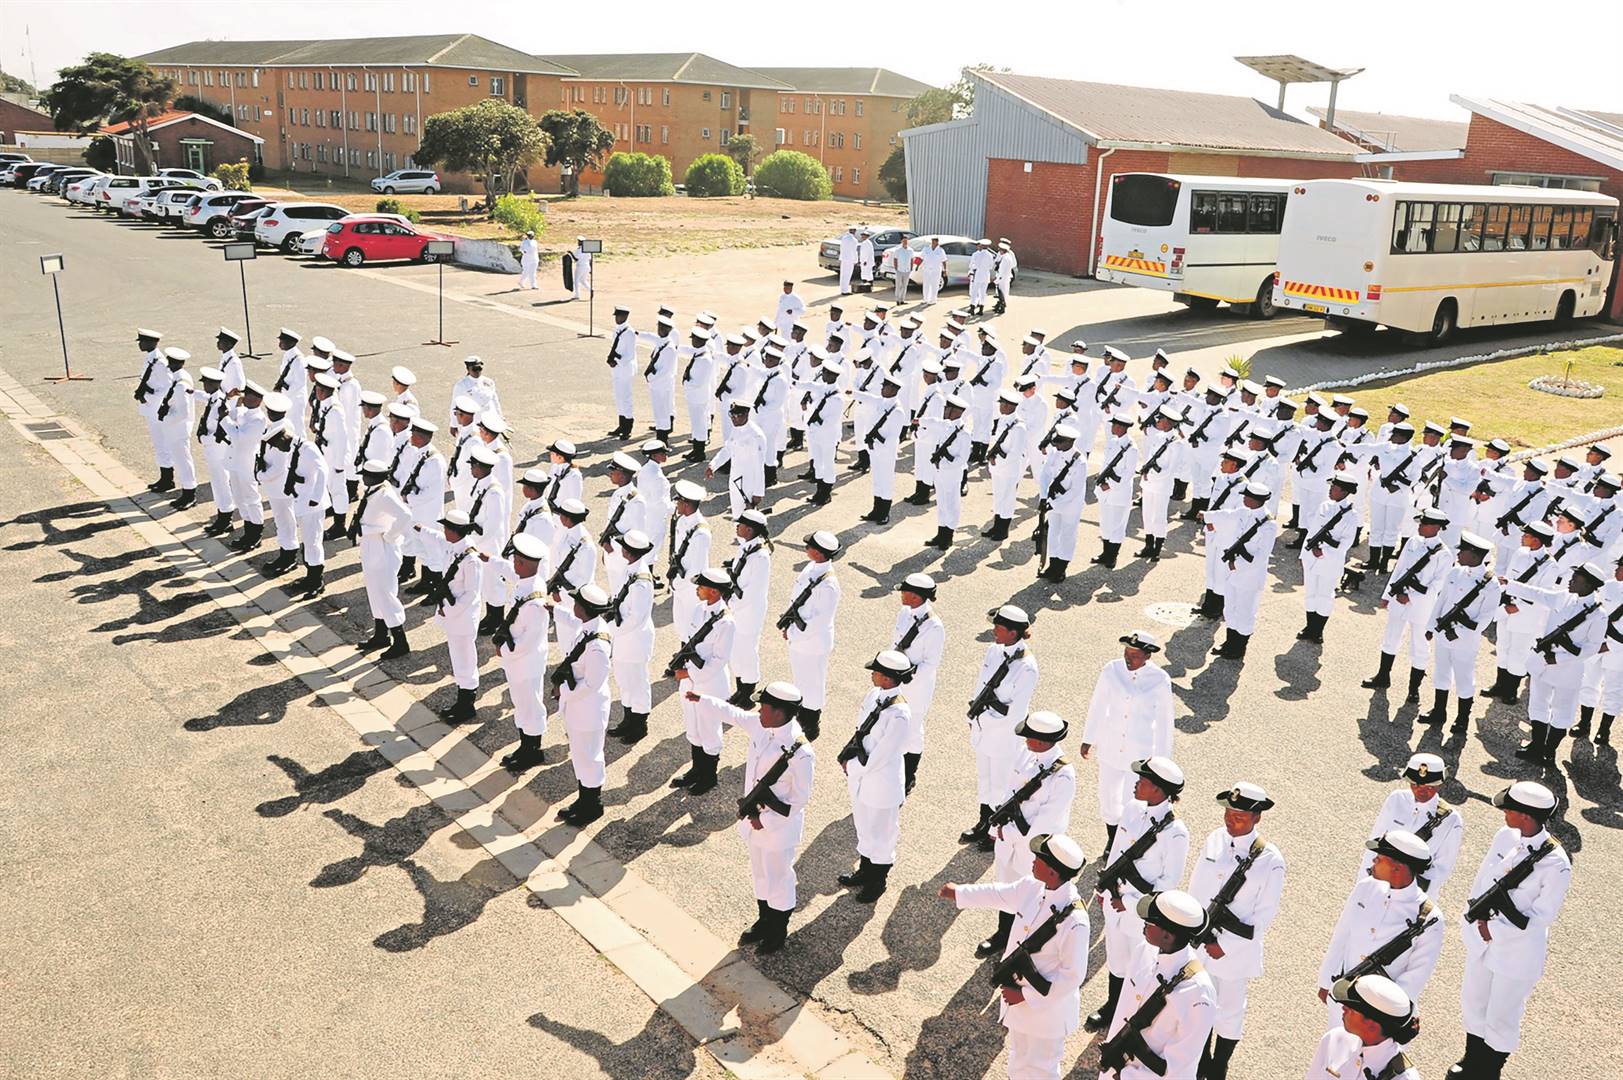 News24 | Alleged nepotism as SA navy officer course is delayed to accommodate admirals' sons